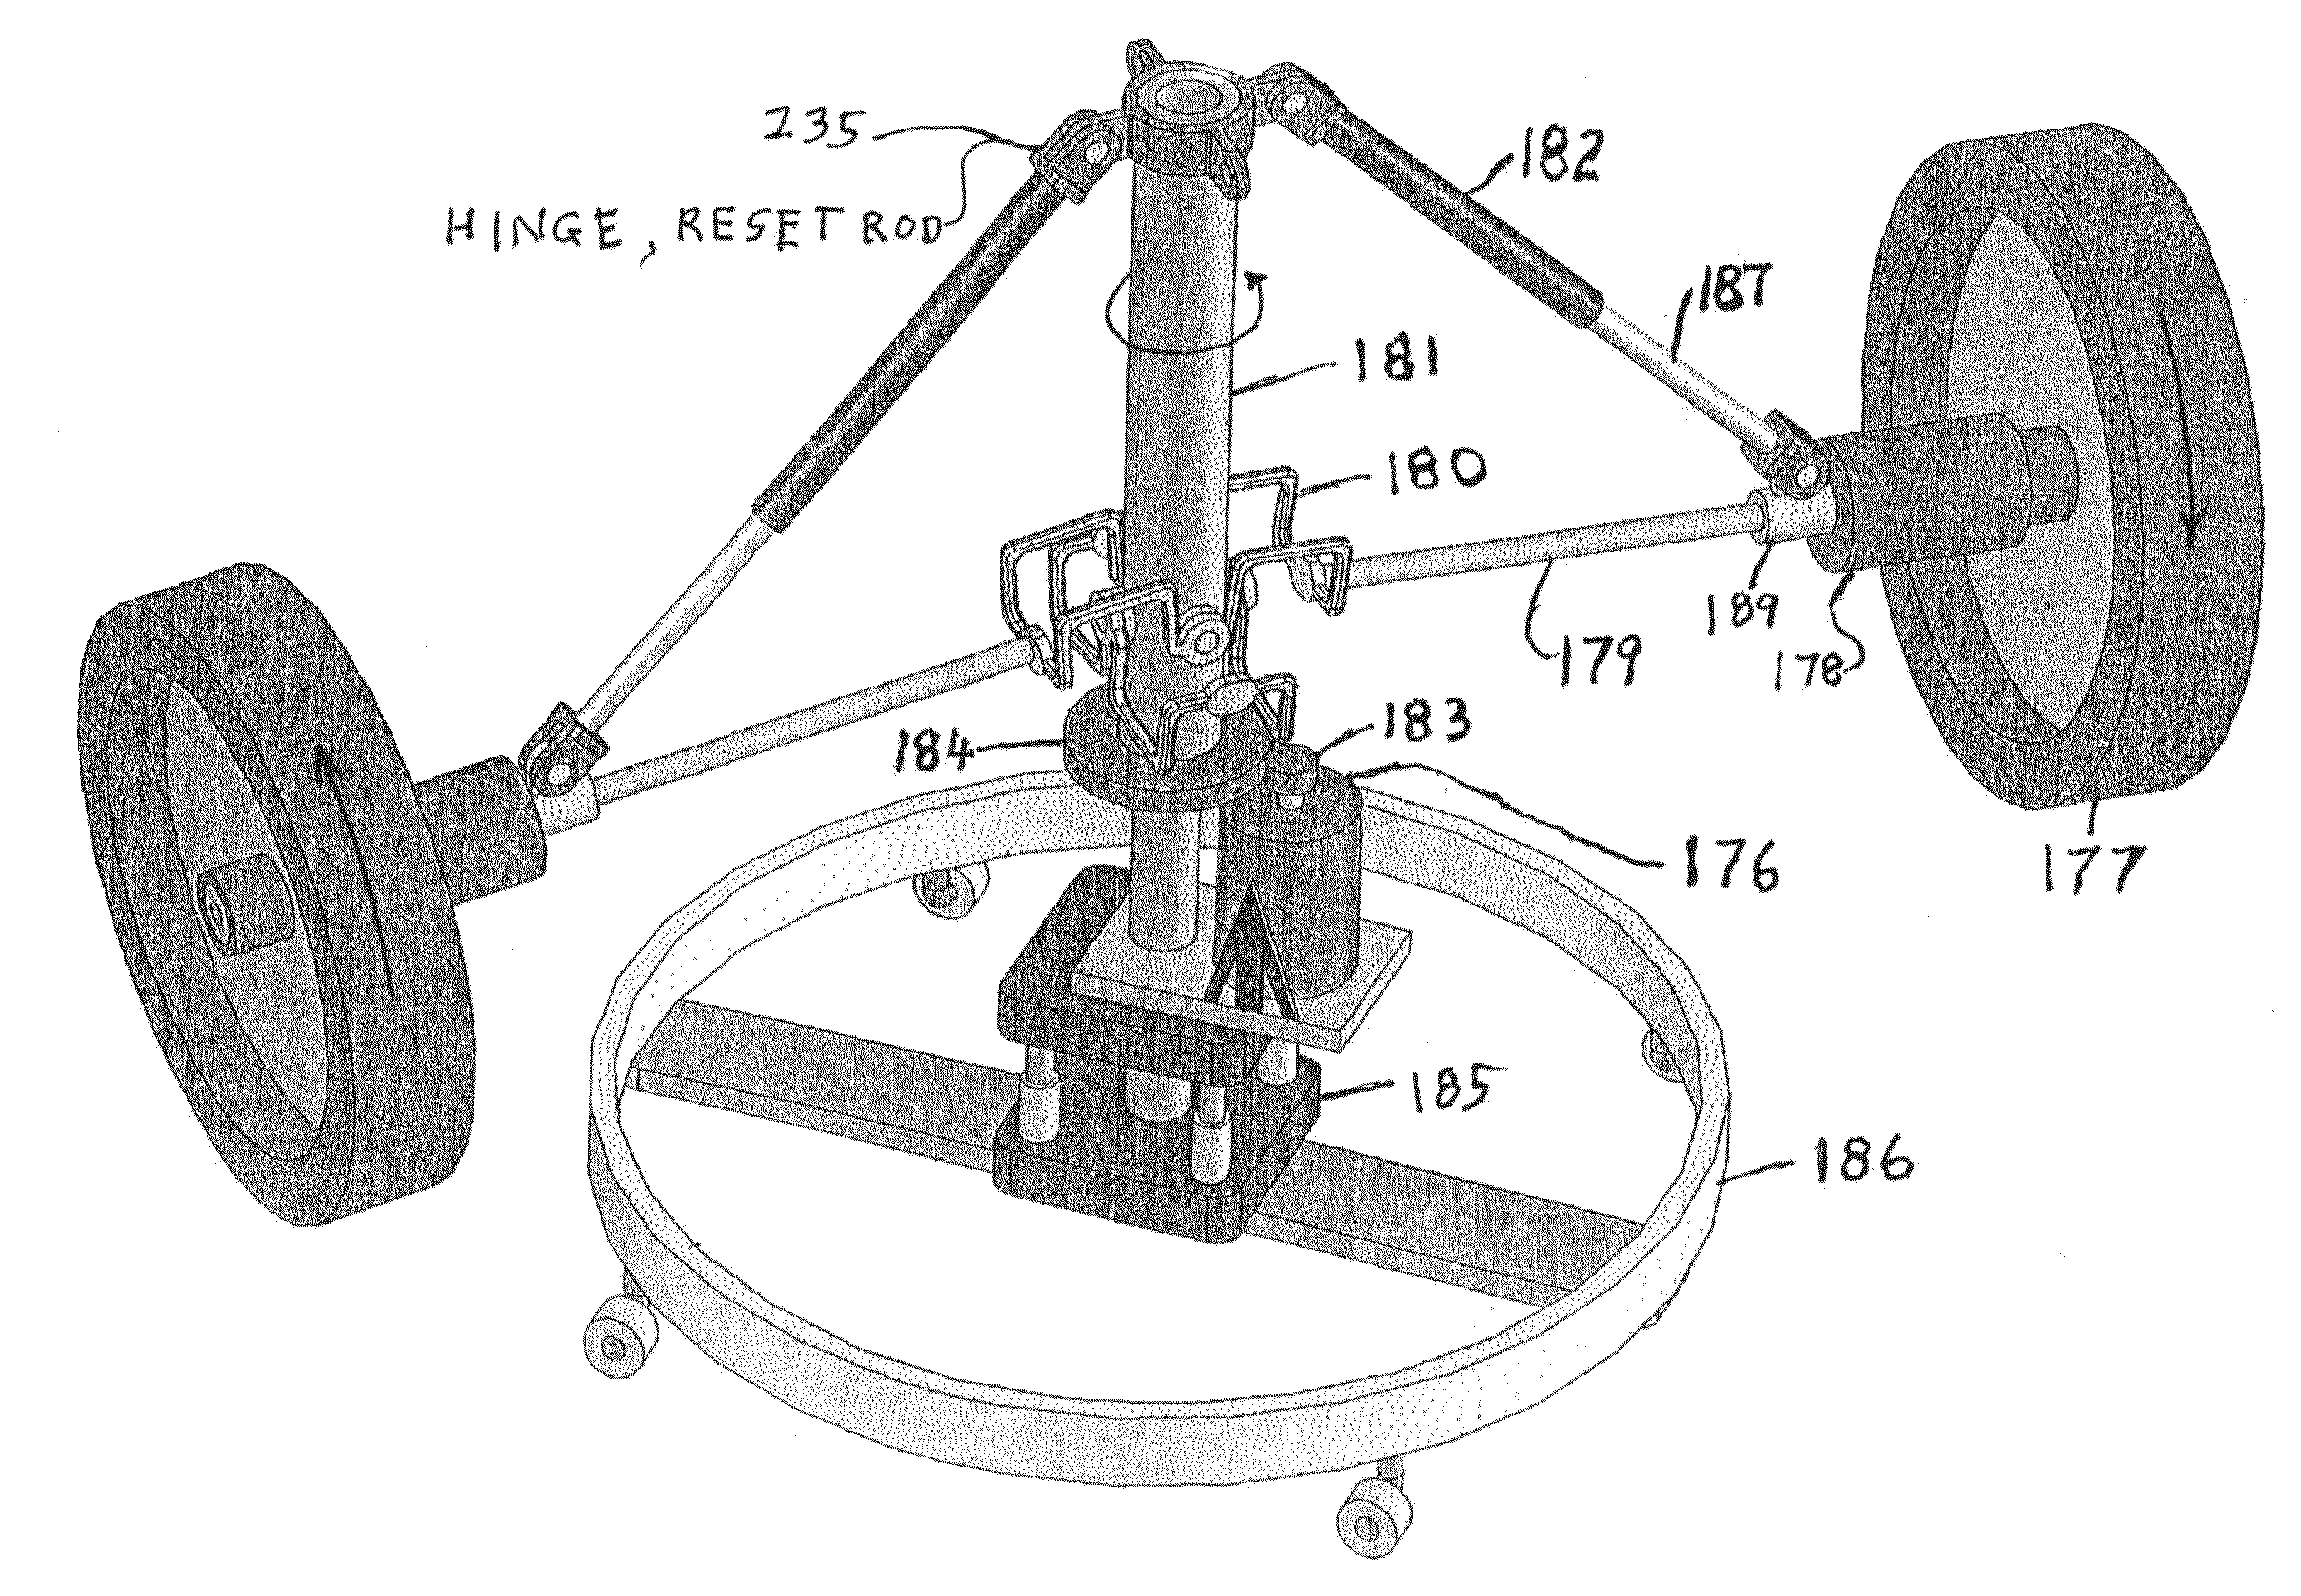 Inertial propulsion device to move an object up and down